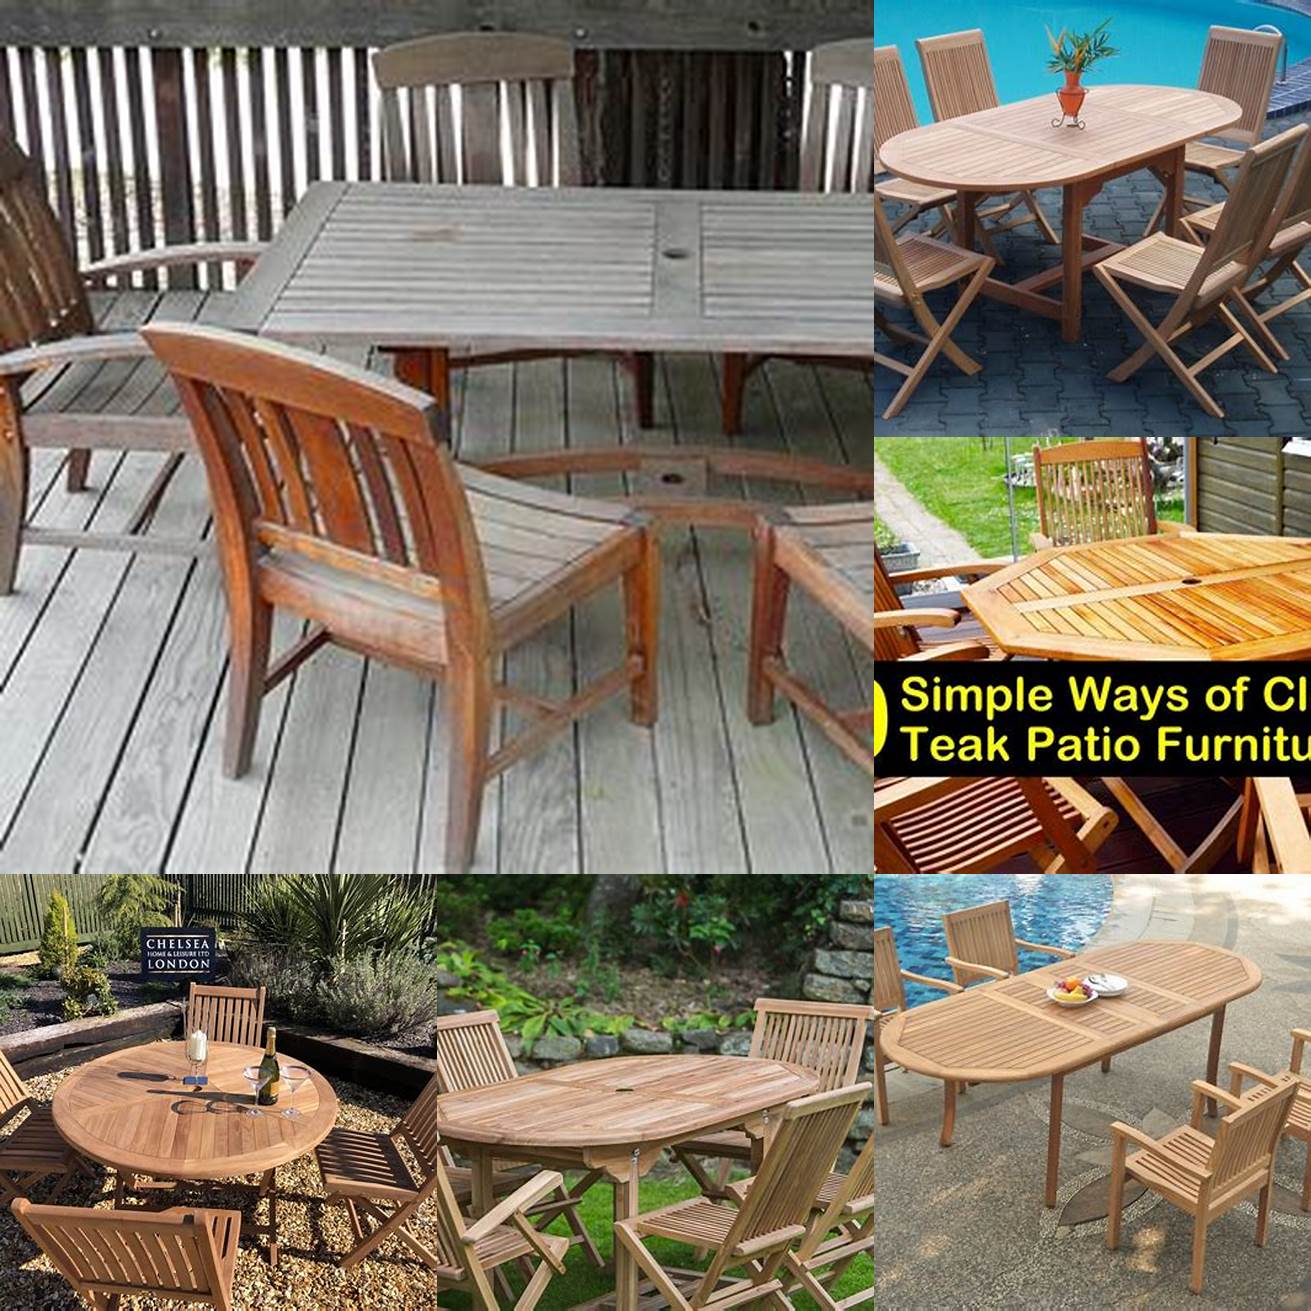 Avoid placing hot items on your teak furniture